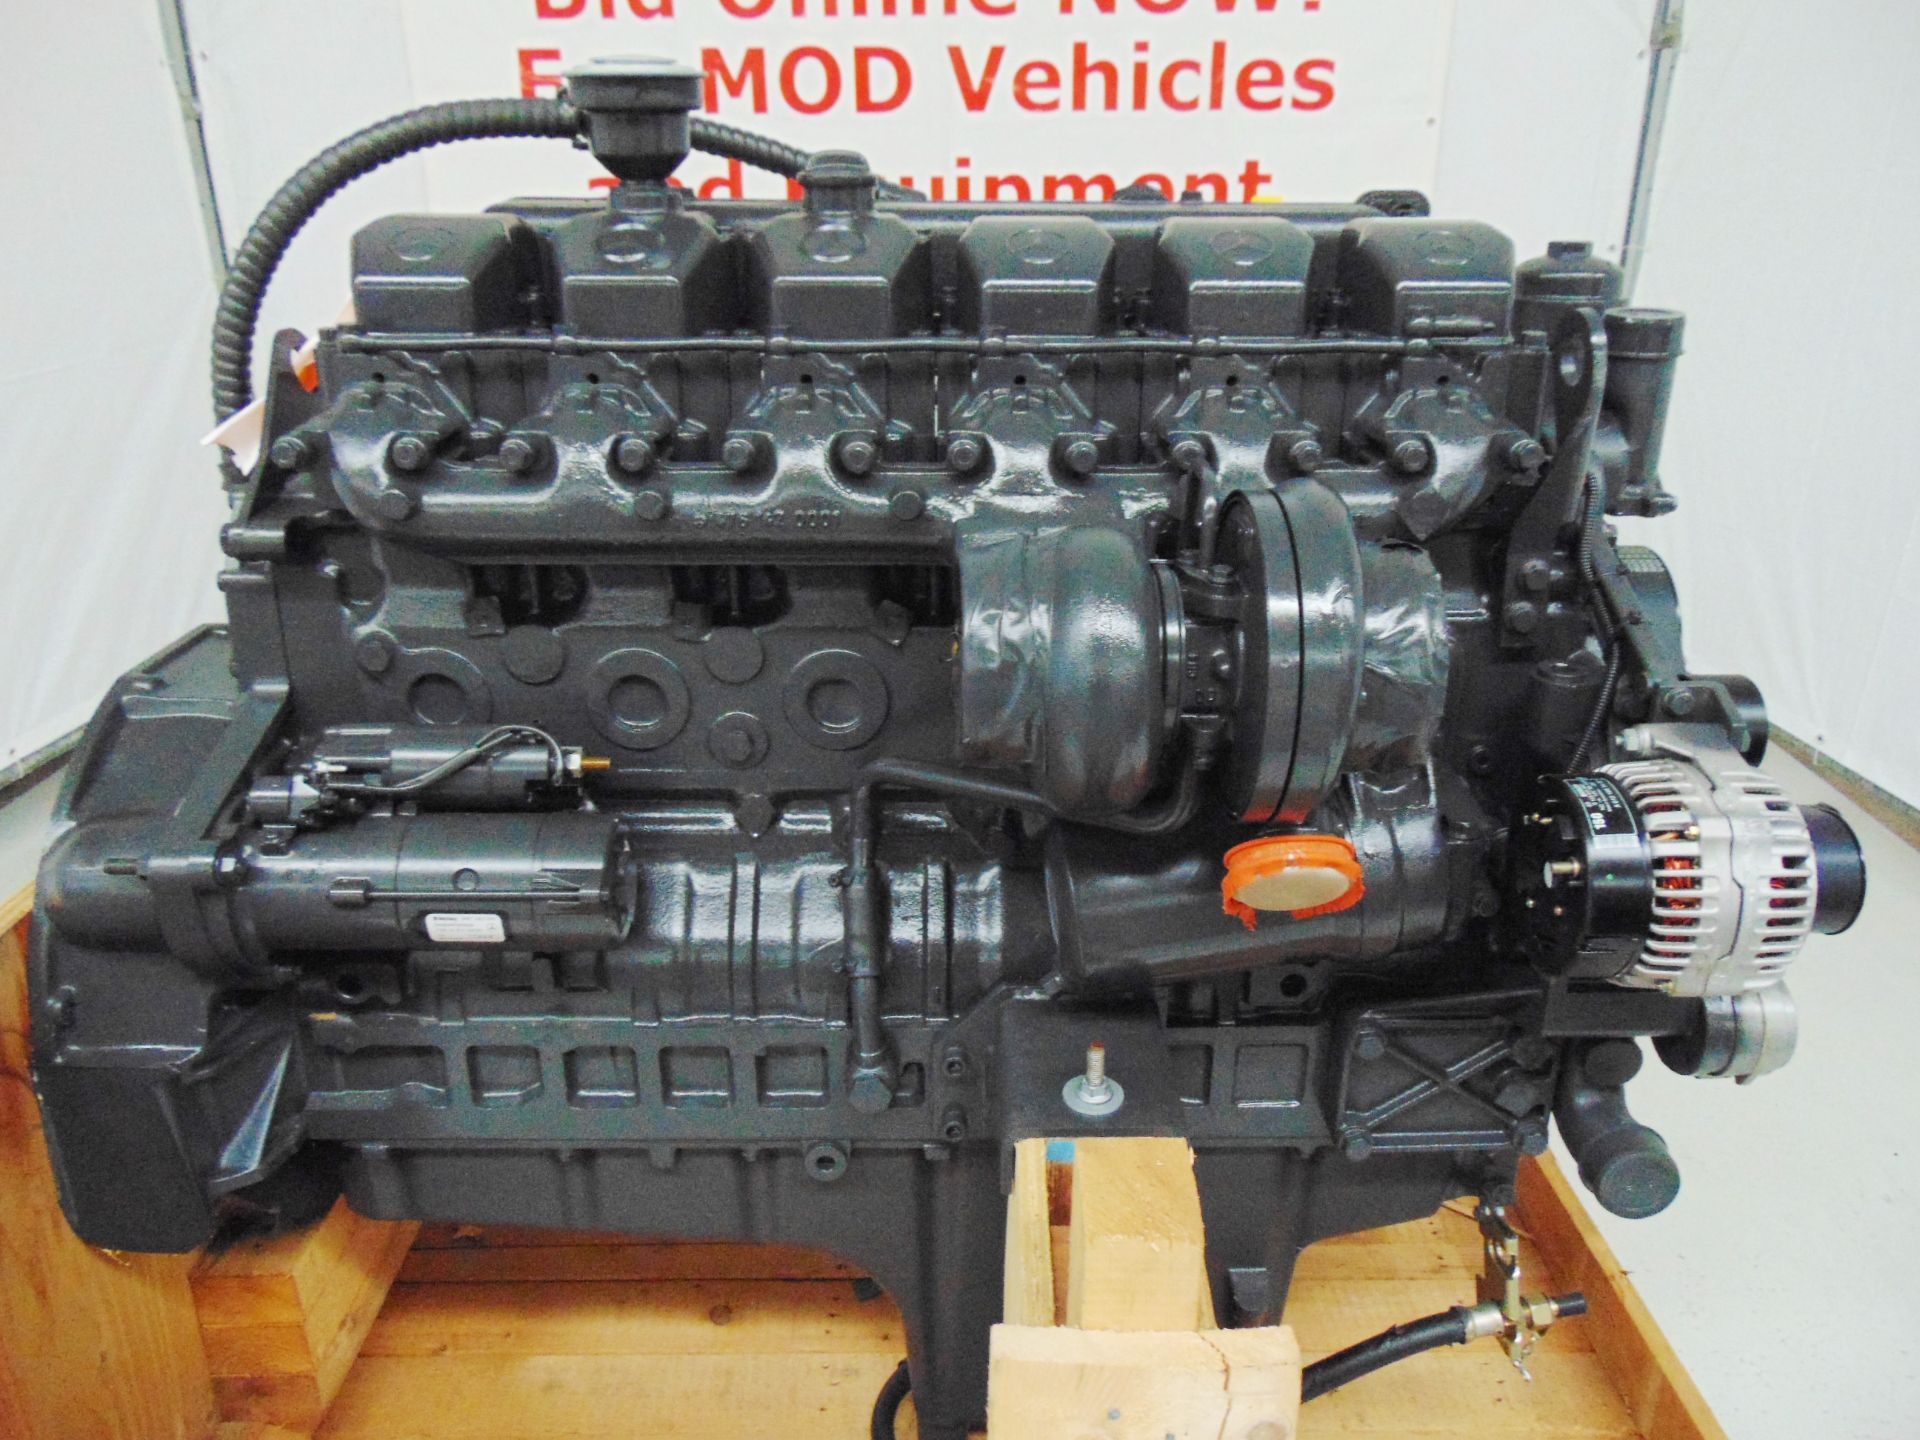 Factory Reconditioned Mercedes-Benz OM424 V12 Turbo Diesel Engine - Image 14 of 34